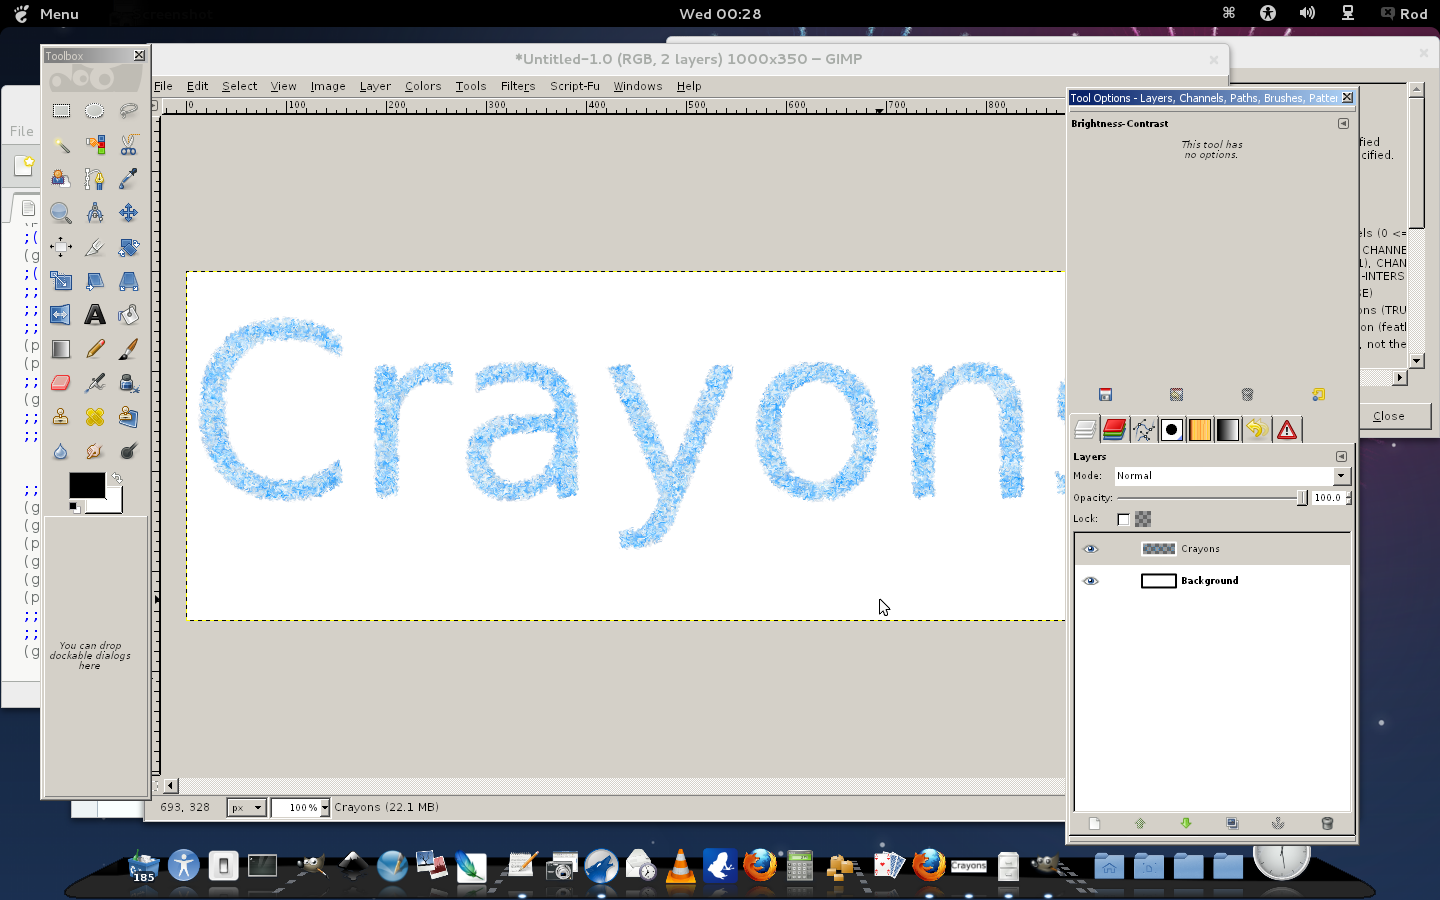 crayon - definition of crayon by the Free.